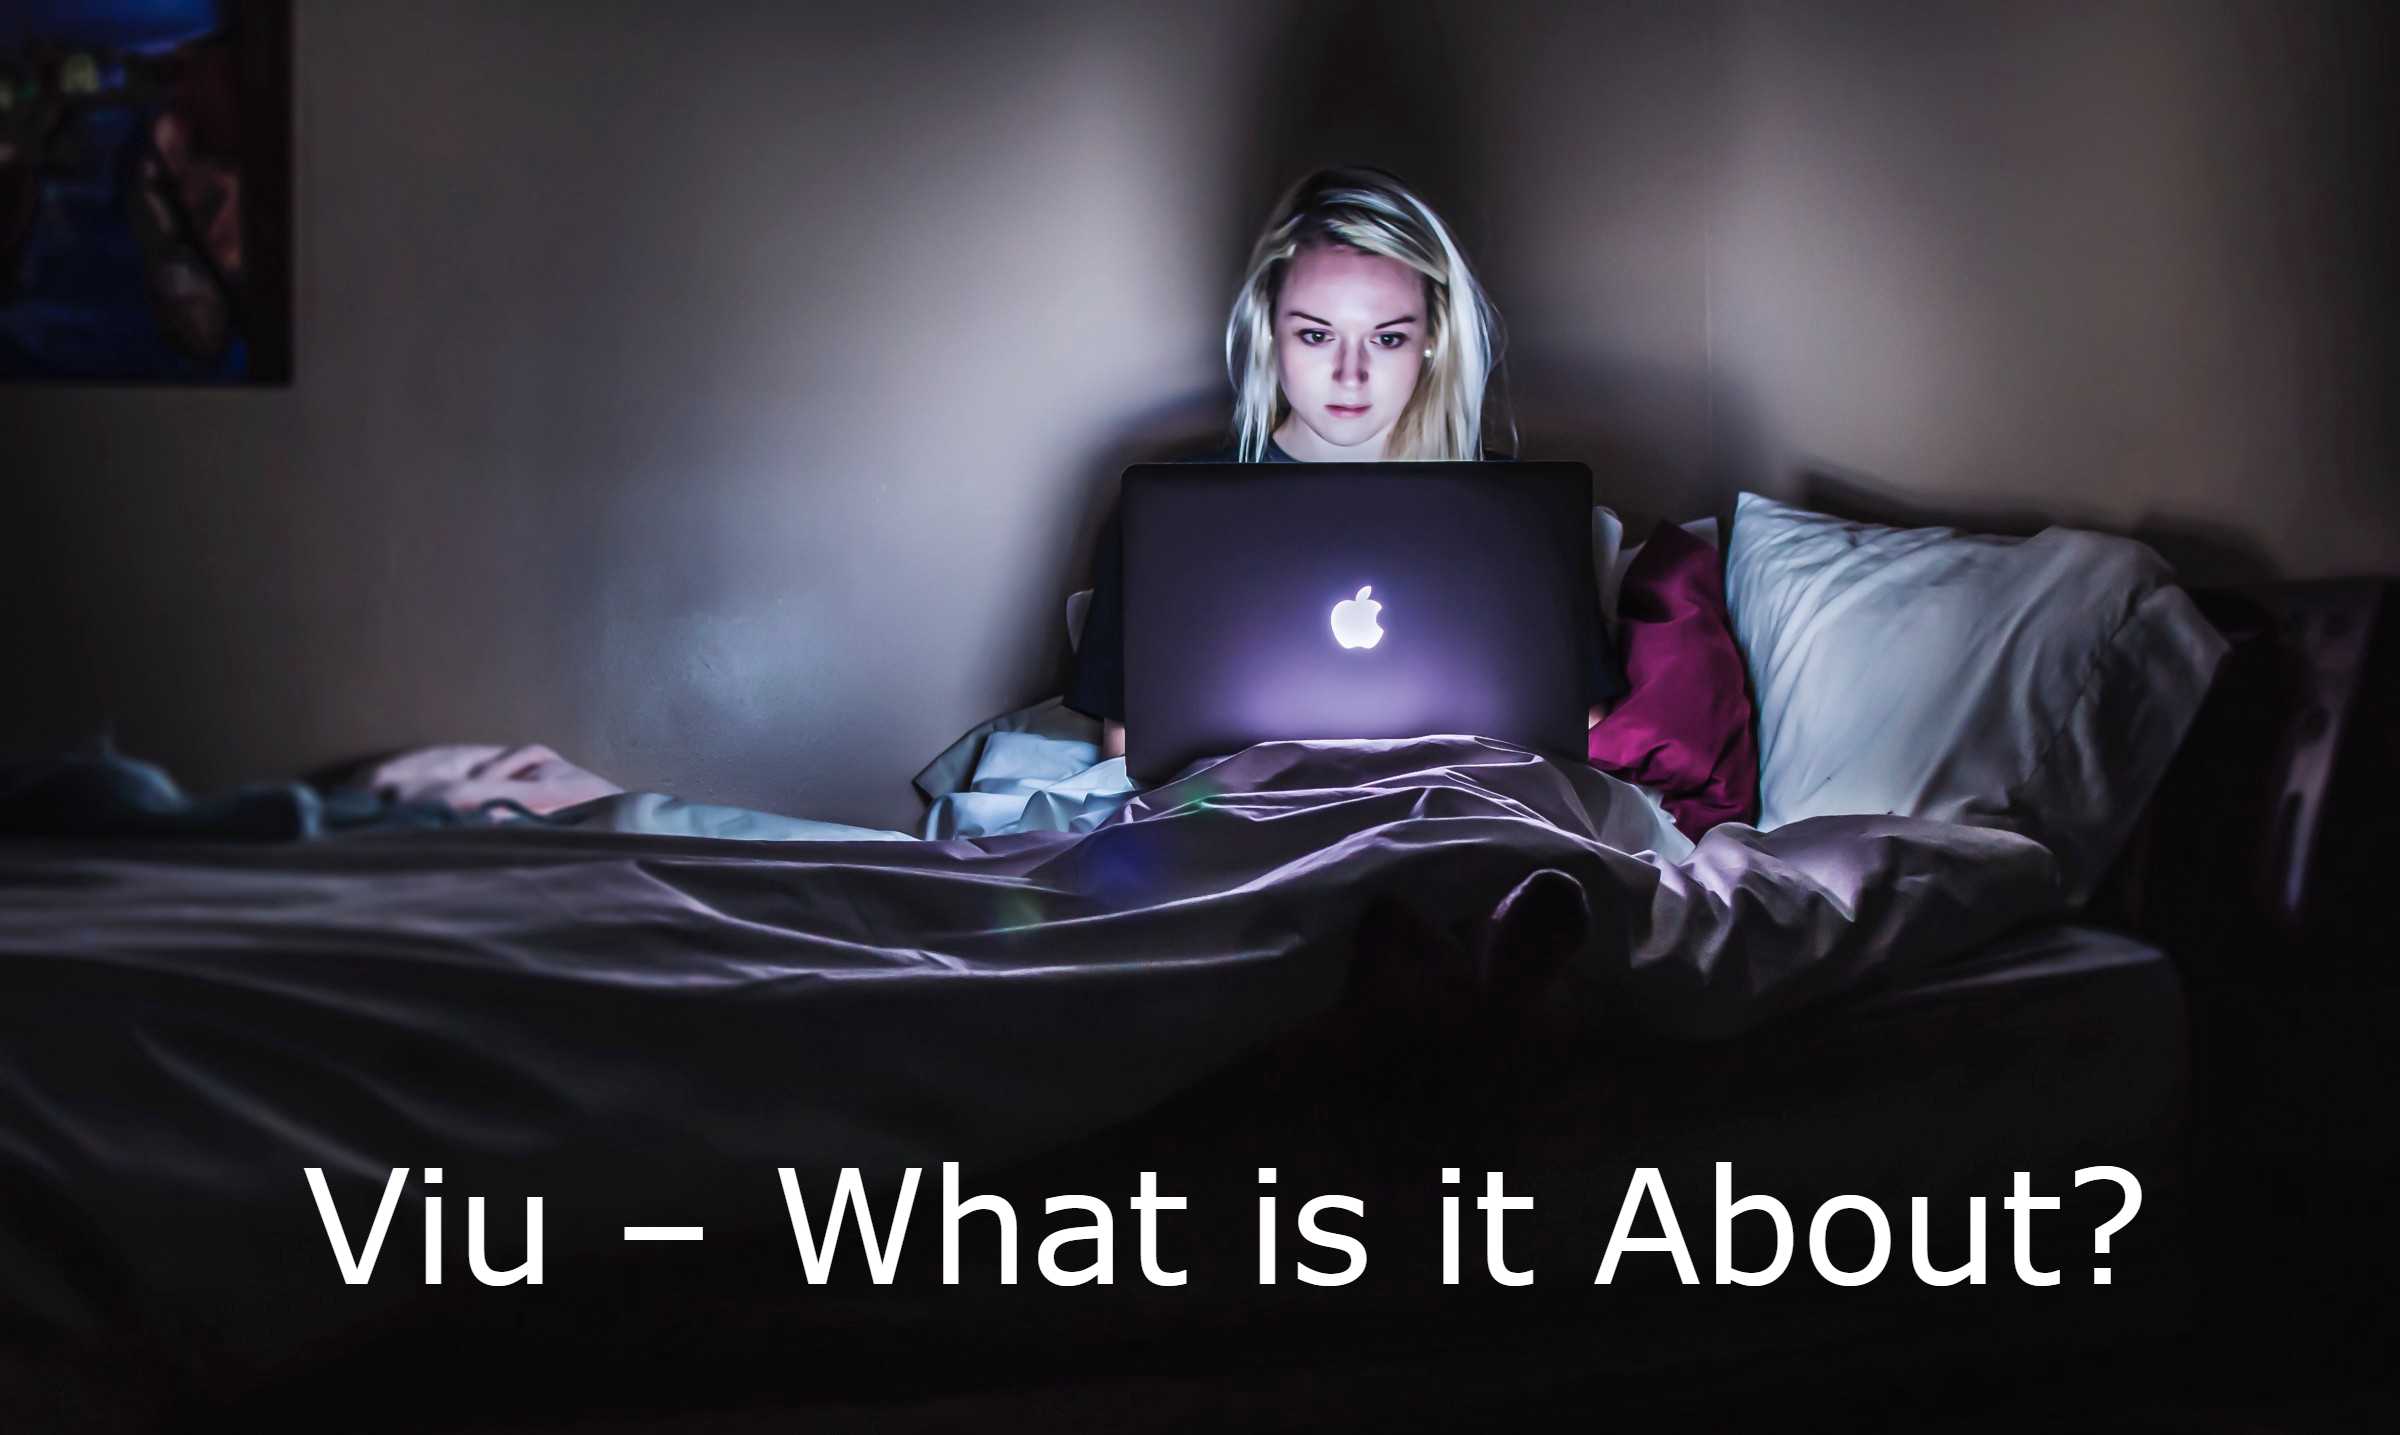 Viu – What is it About?